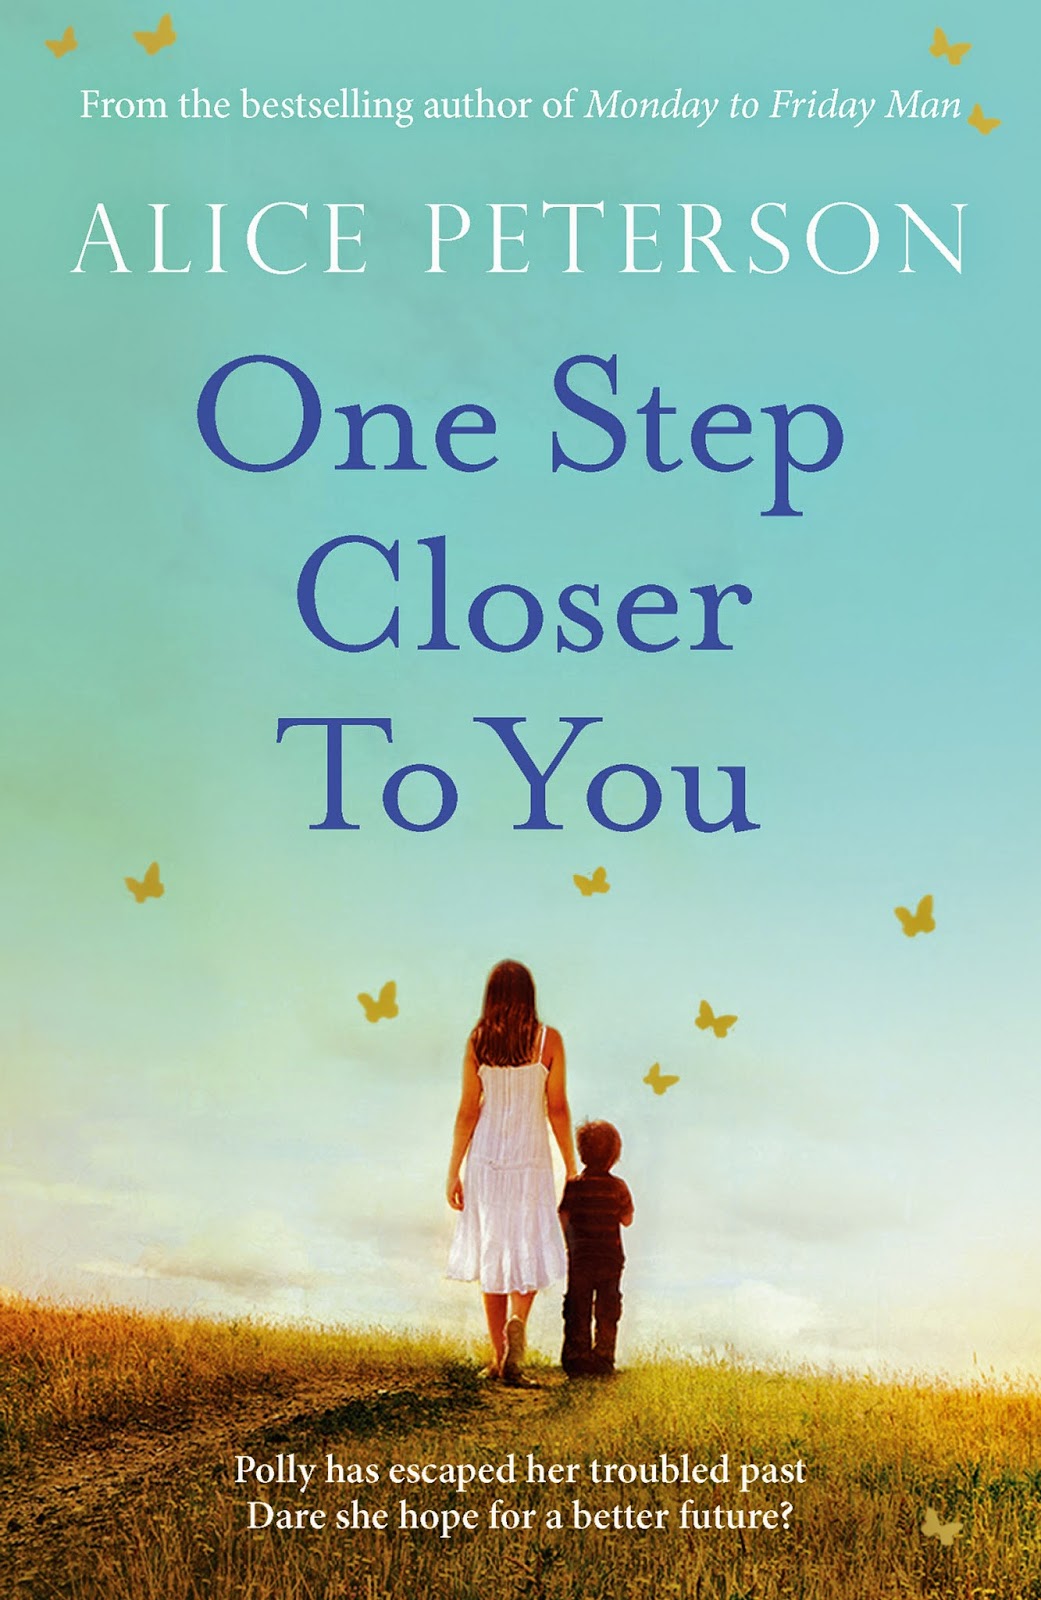 Book step. Alice Peterson. Alice Peterson books. One Step closer to you. The one книга.